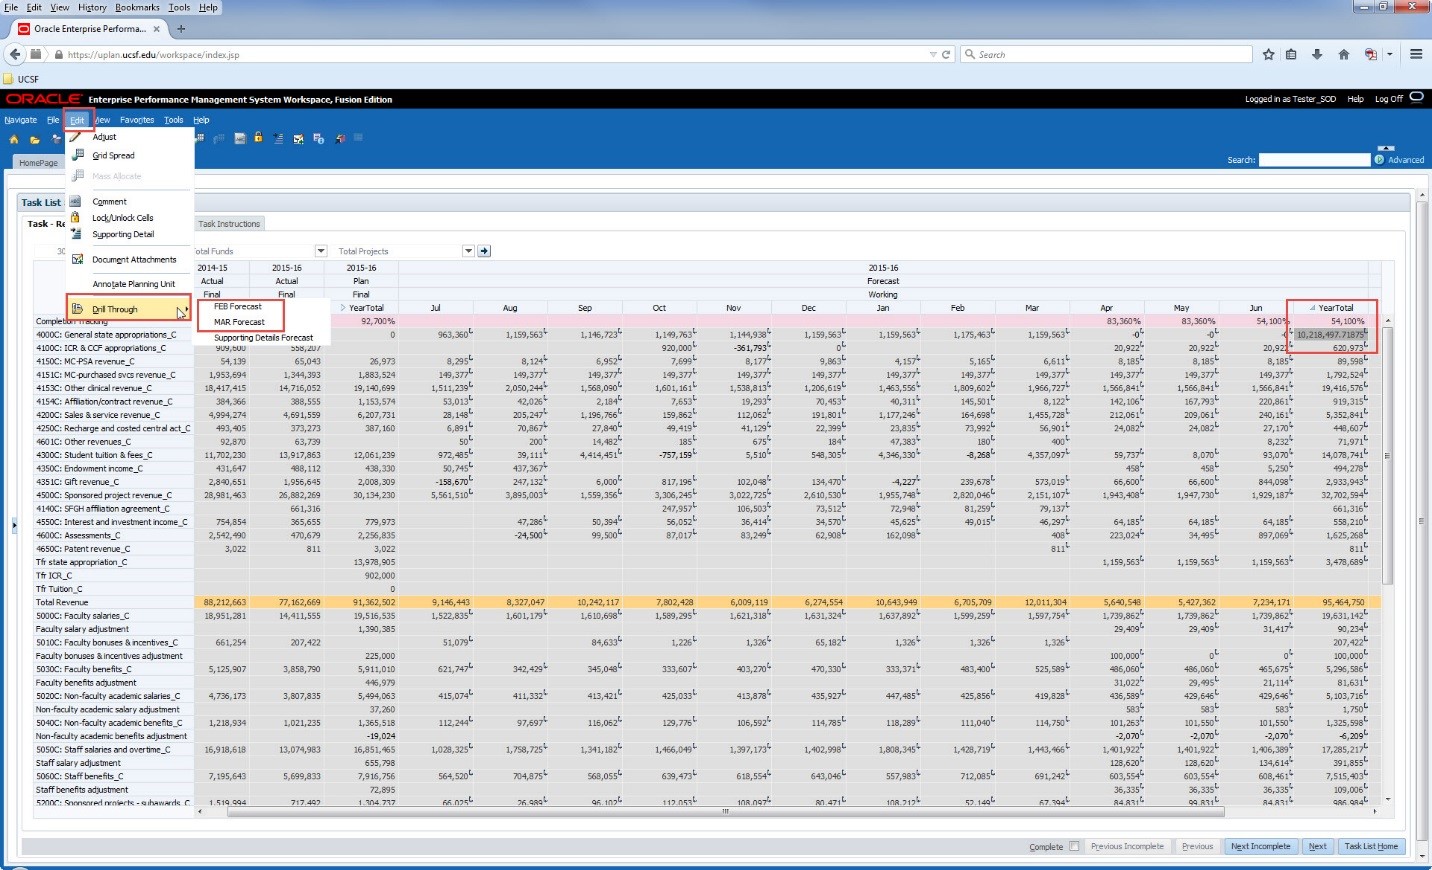 Shows the menu users would see when accessing drill through planning by project supporting detail upon right-clicking the highlighted cell when using Smart View.